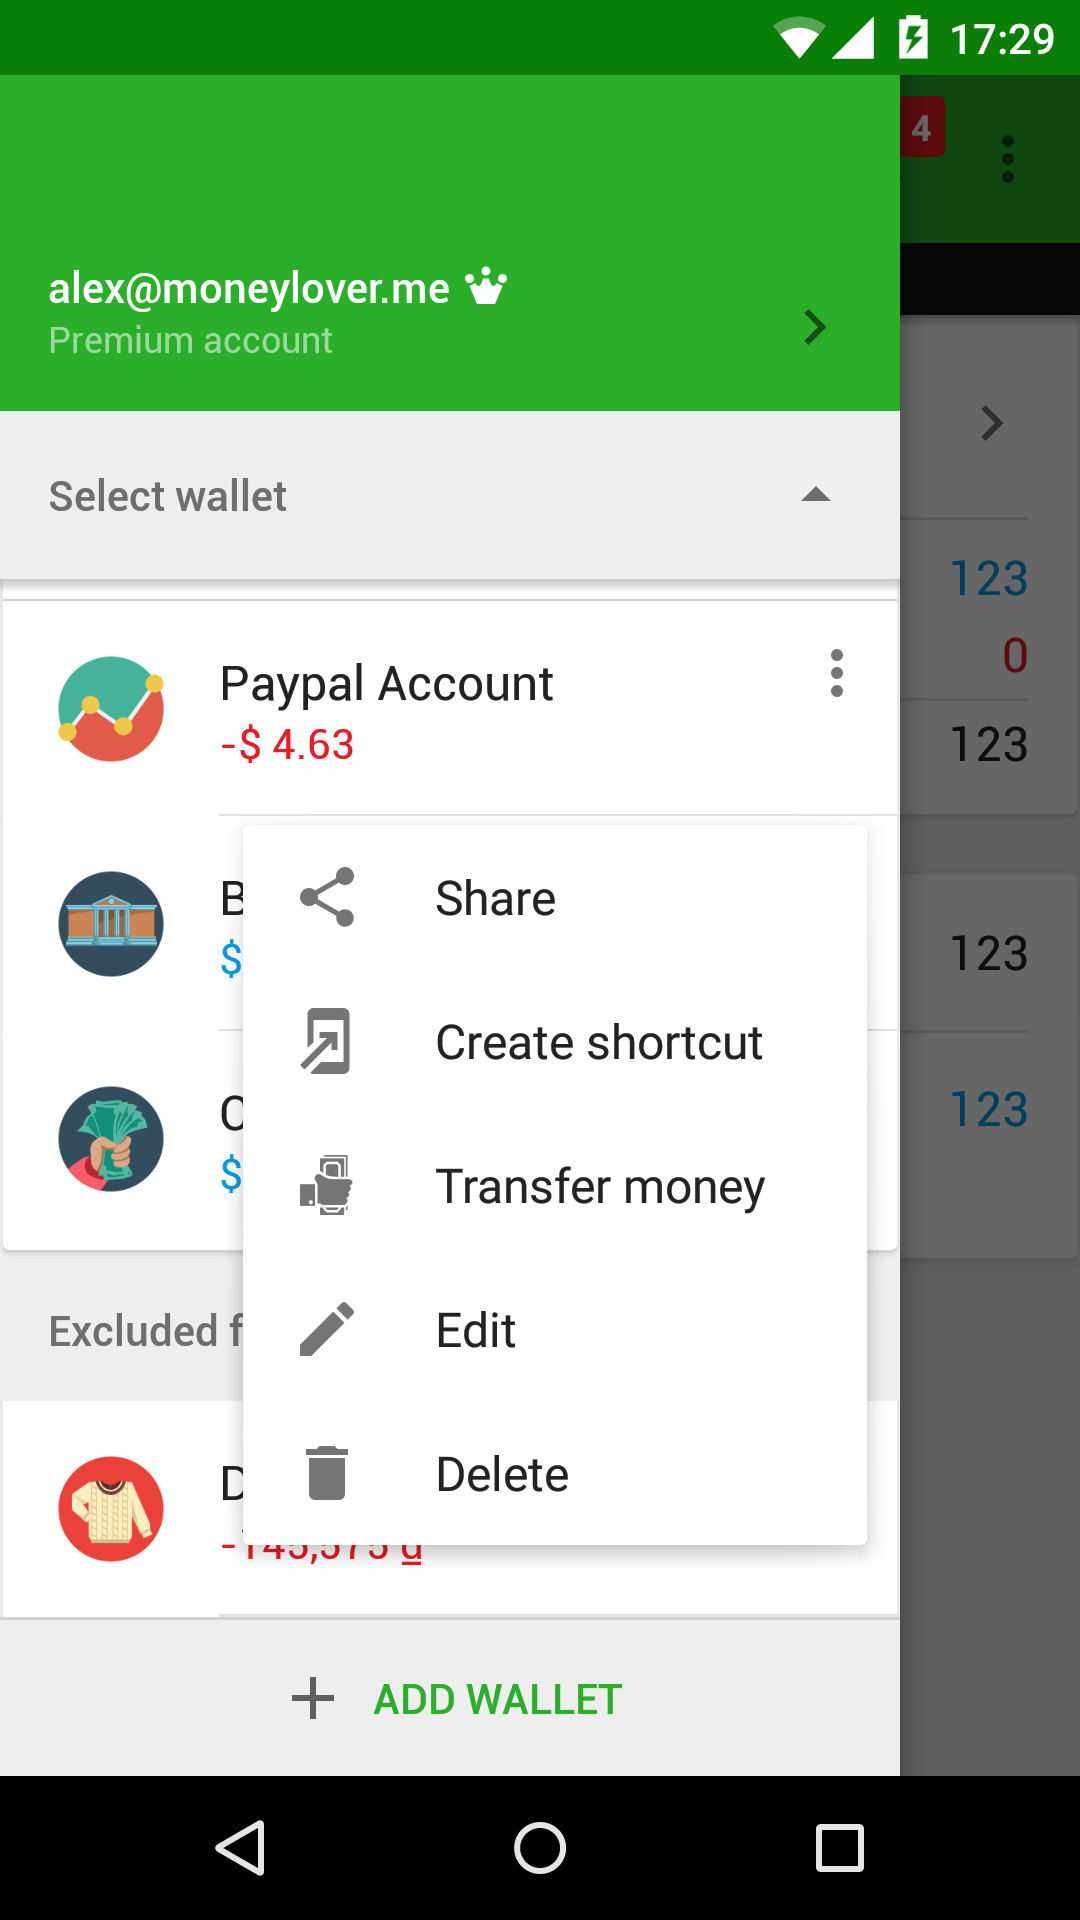 Share wallet